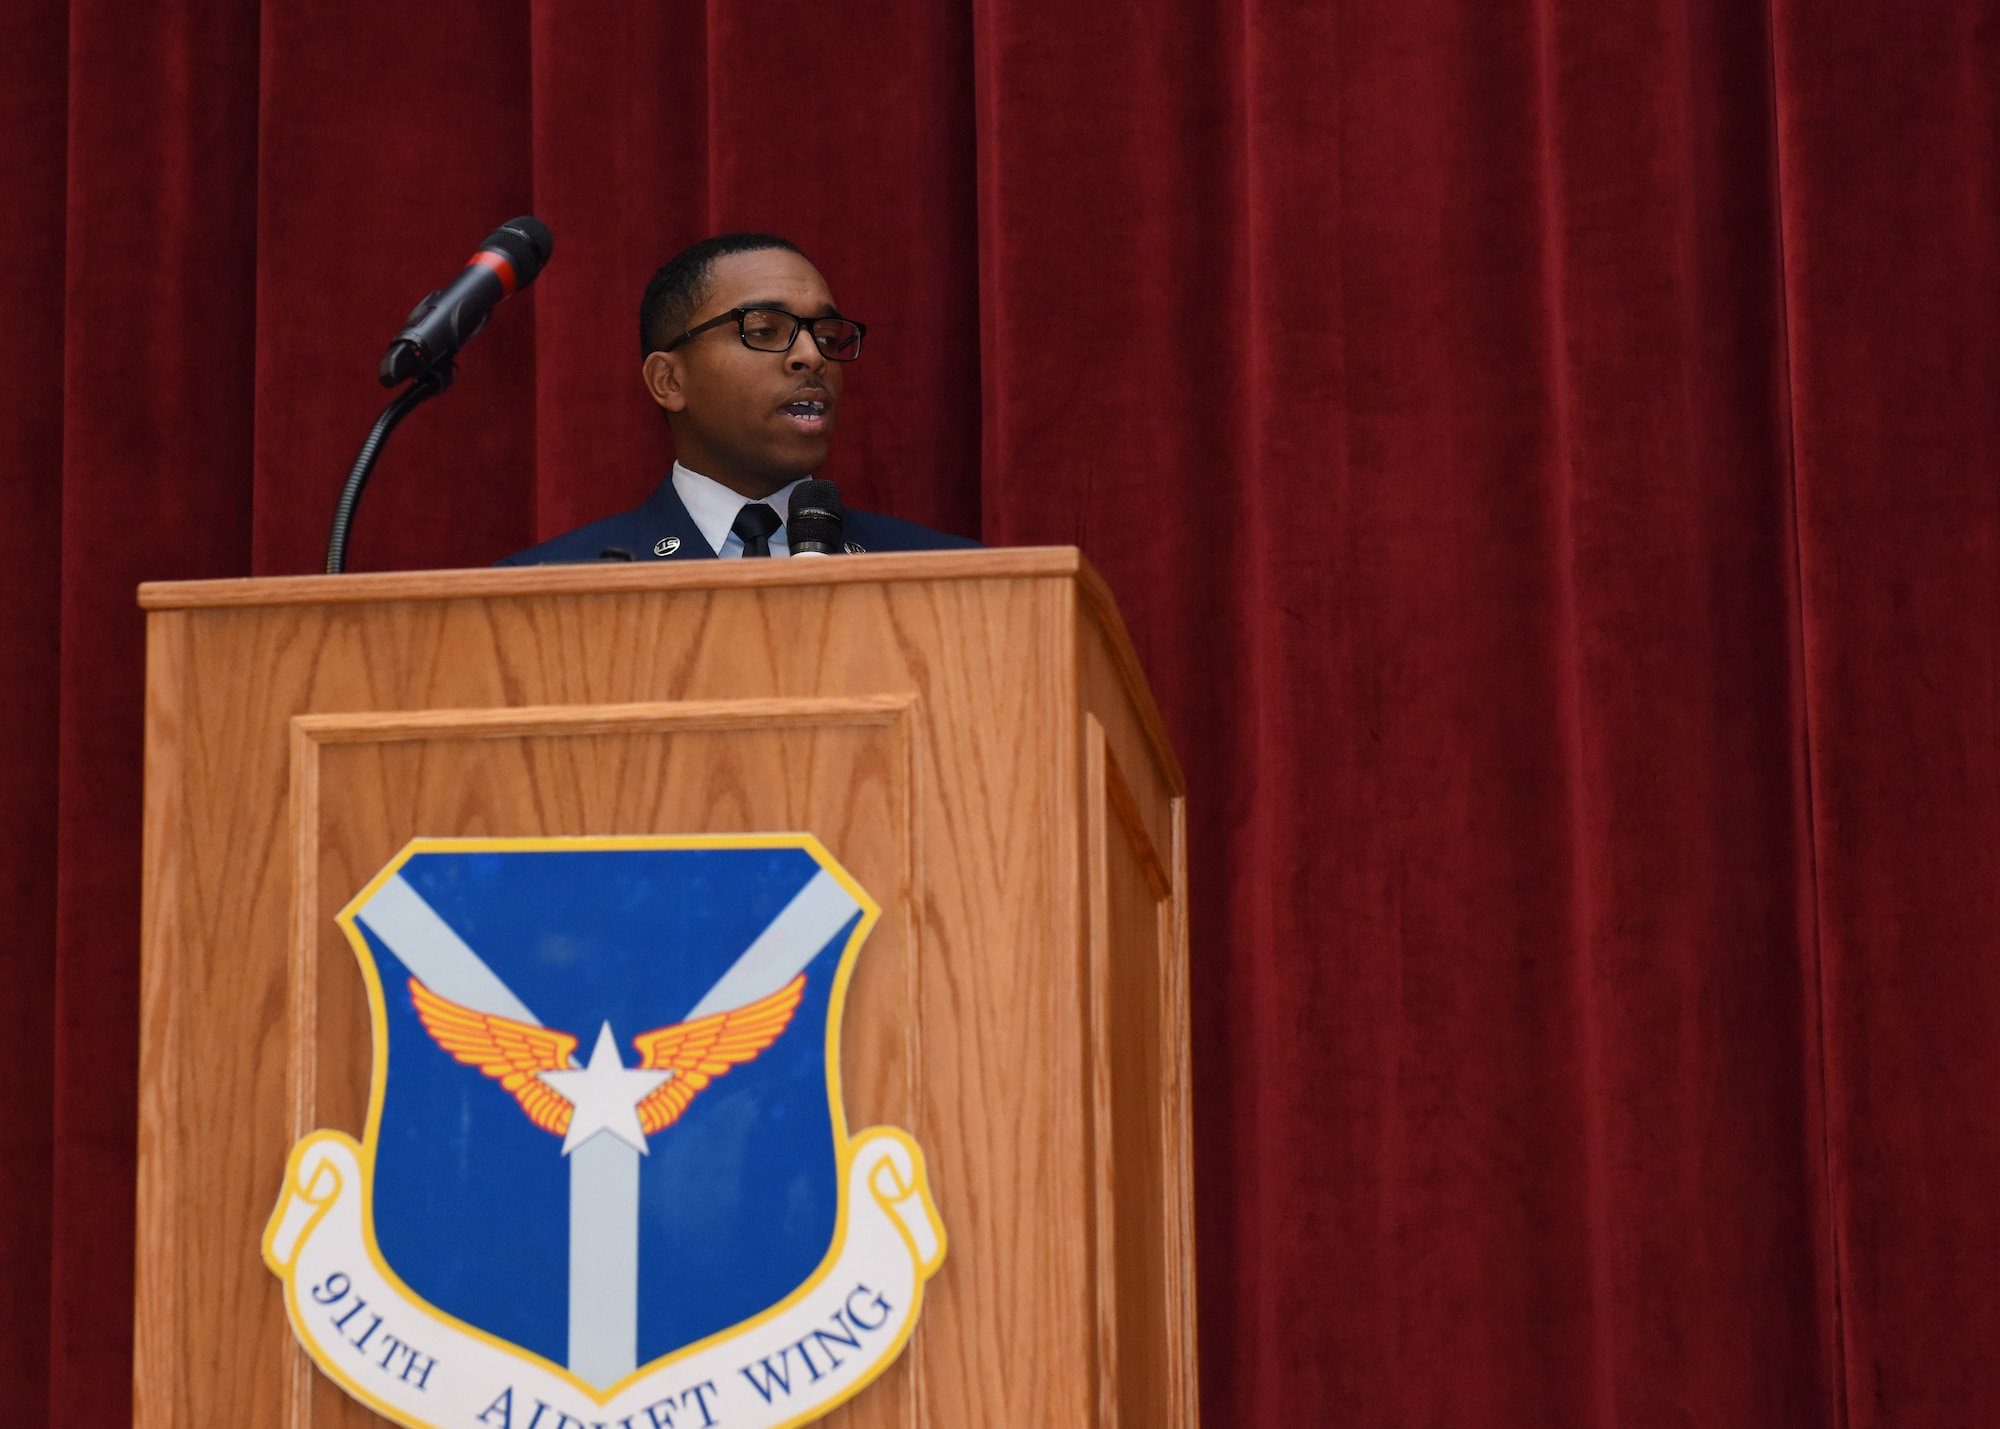 Senior Airman Joseph Dukes, knowledge operations management specialist with the 911th Communications Squadron, sings the National Anthem at an assumption of command ceremony in honor of 911th Airlift Wing commander Col. John F. Robinson at Moon Area Middle School in Coraopolis, Pennsylvania, Nov. 2, 2019.